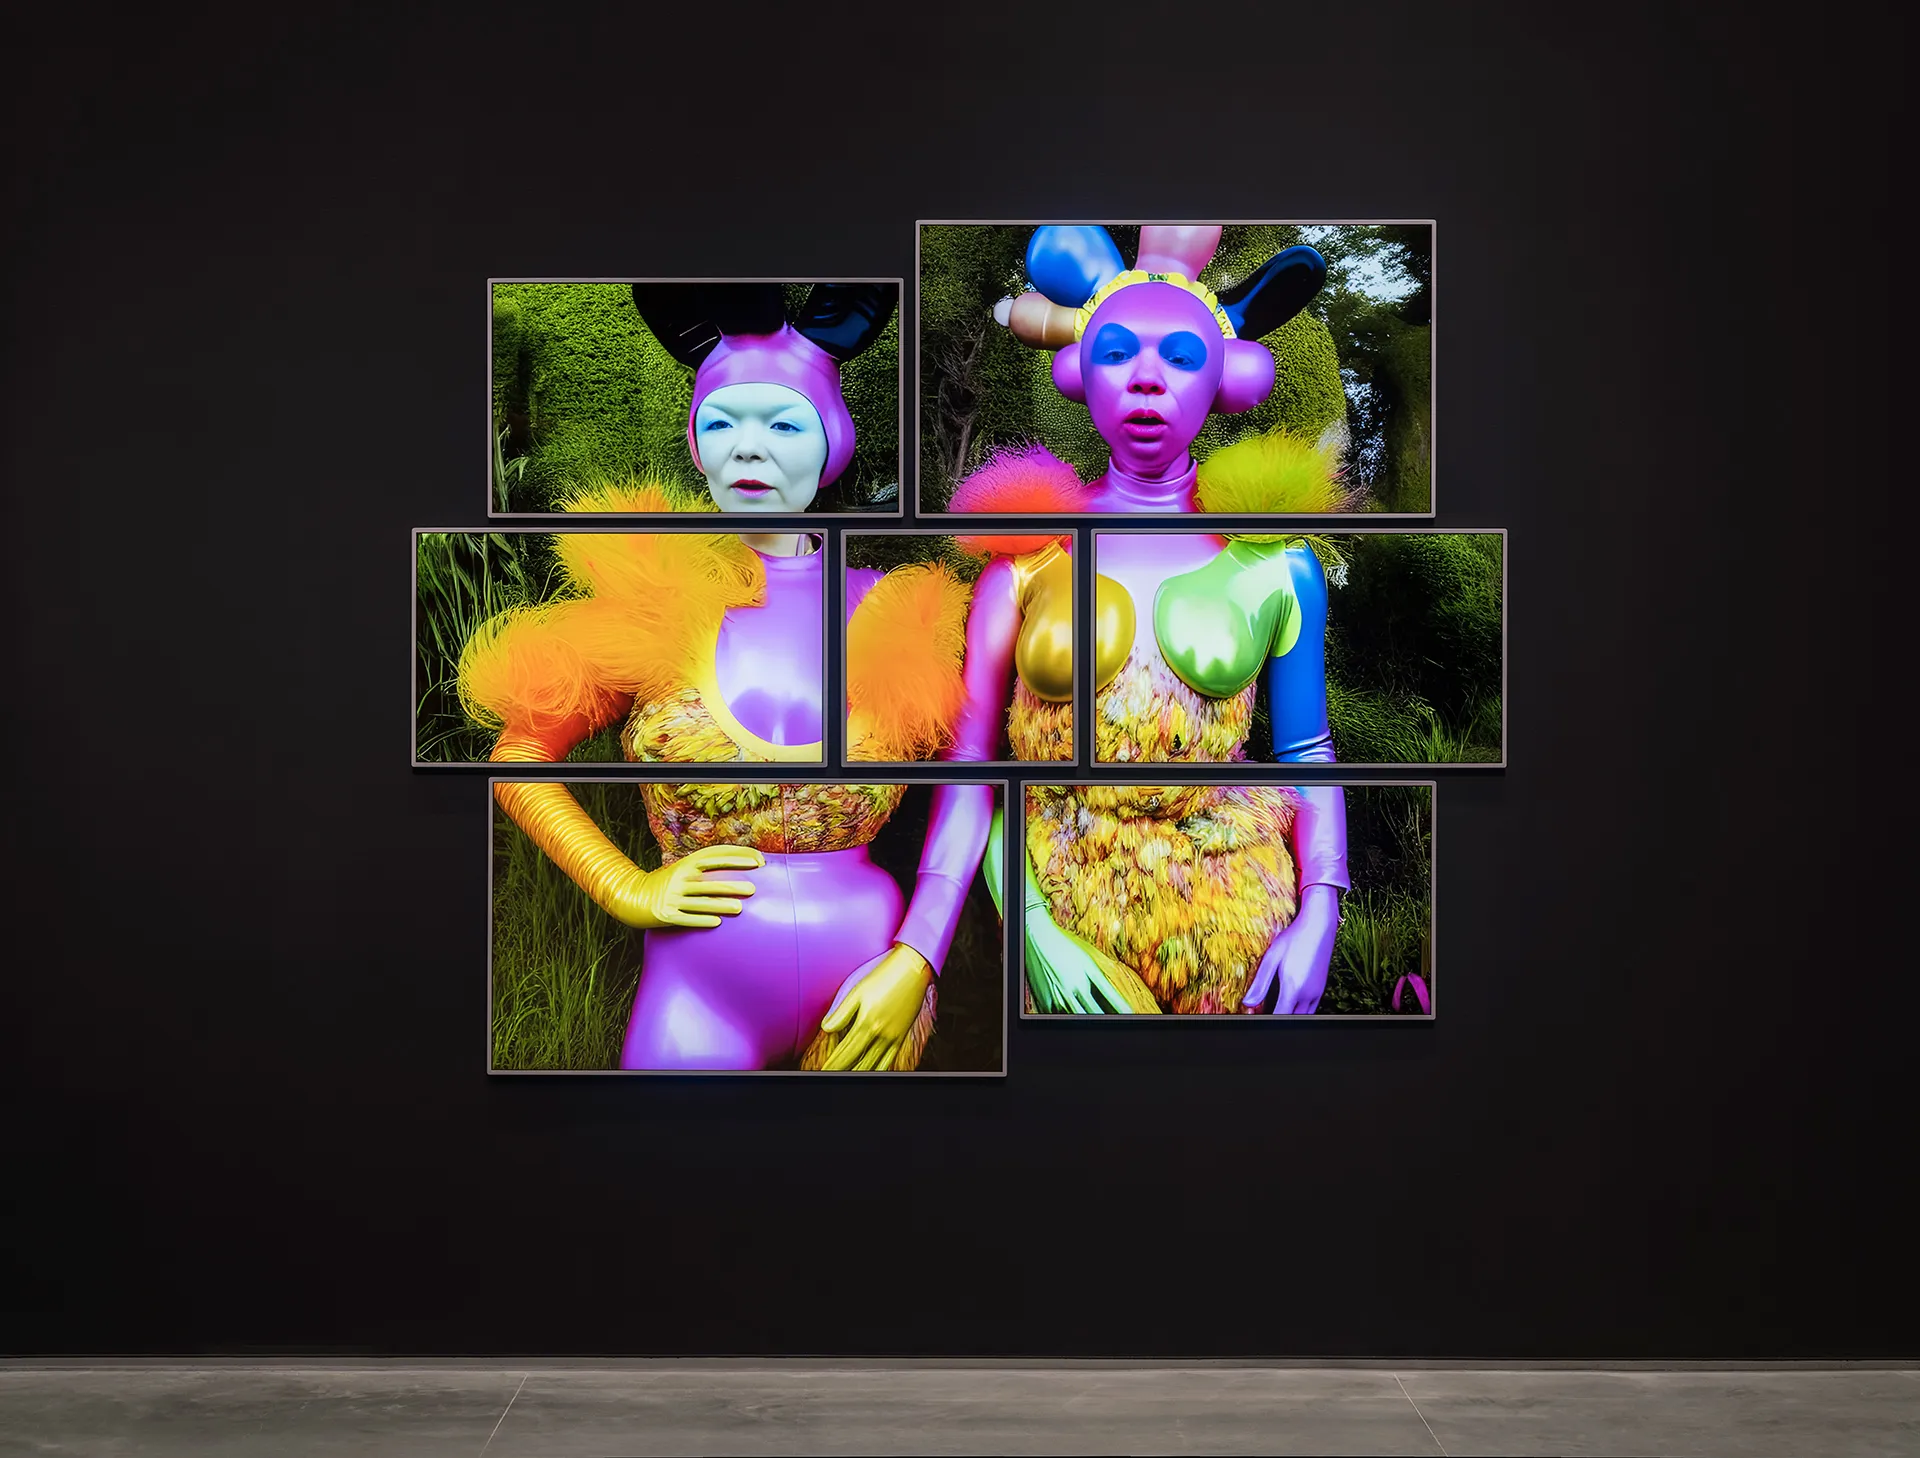 A digital image of two front facing figures displayed across seven screens. Both figures wear brightly colored skin tight garments ornamented with colorful feathers and there is some greenery behind them.